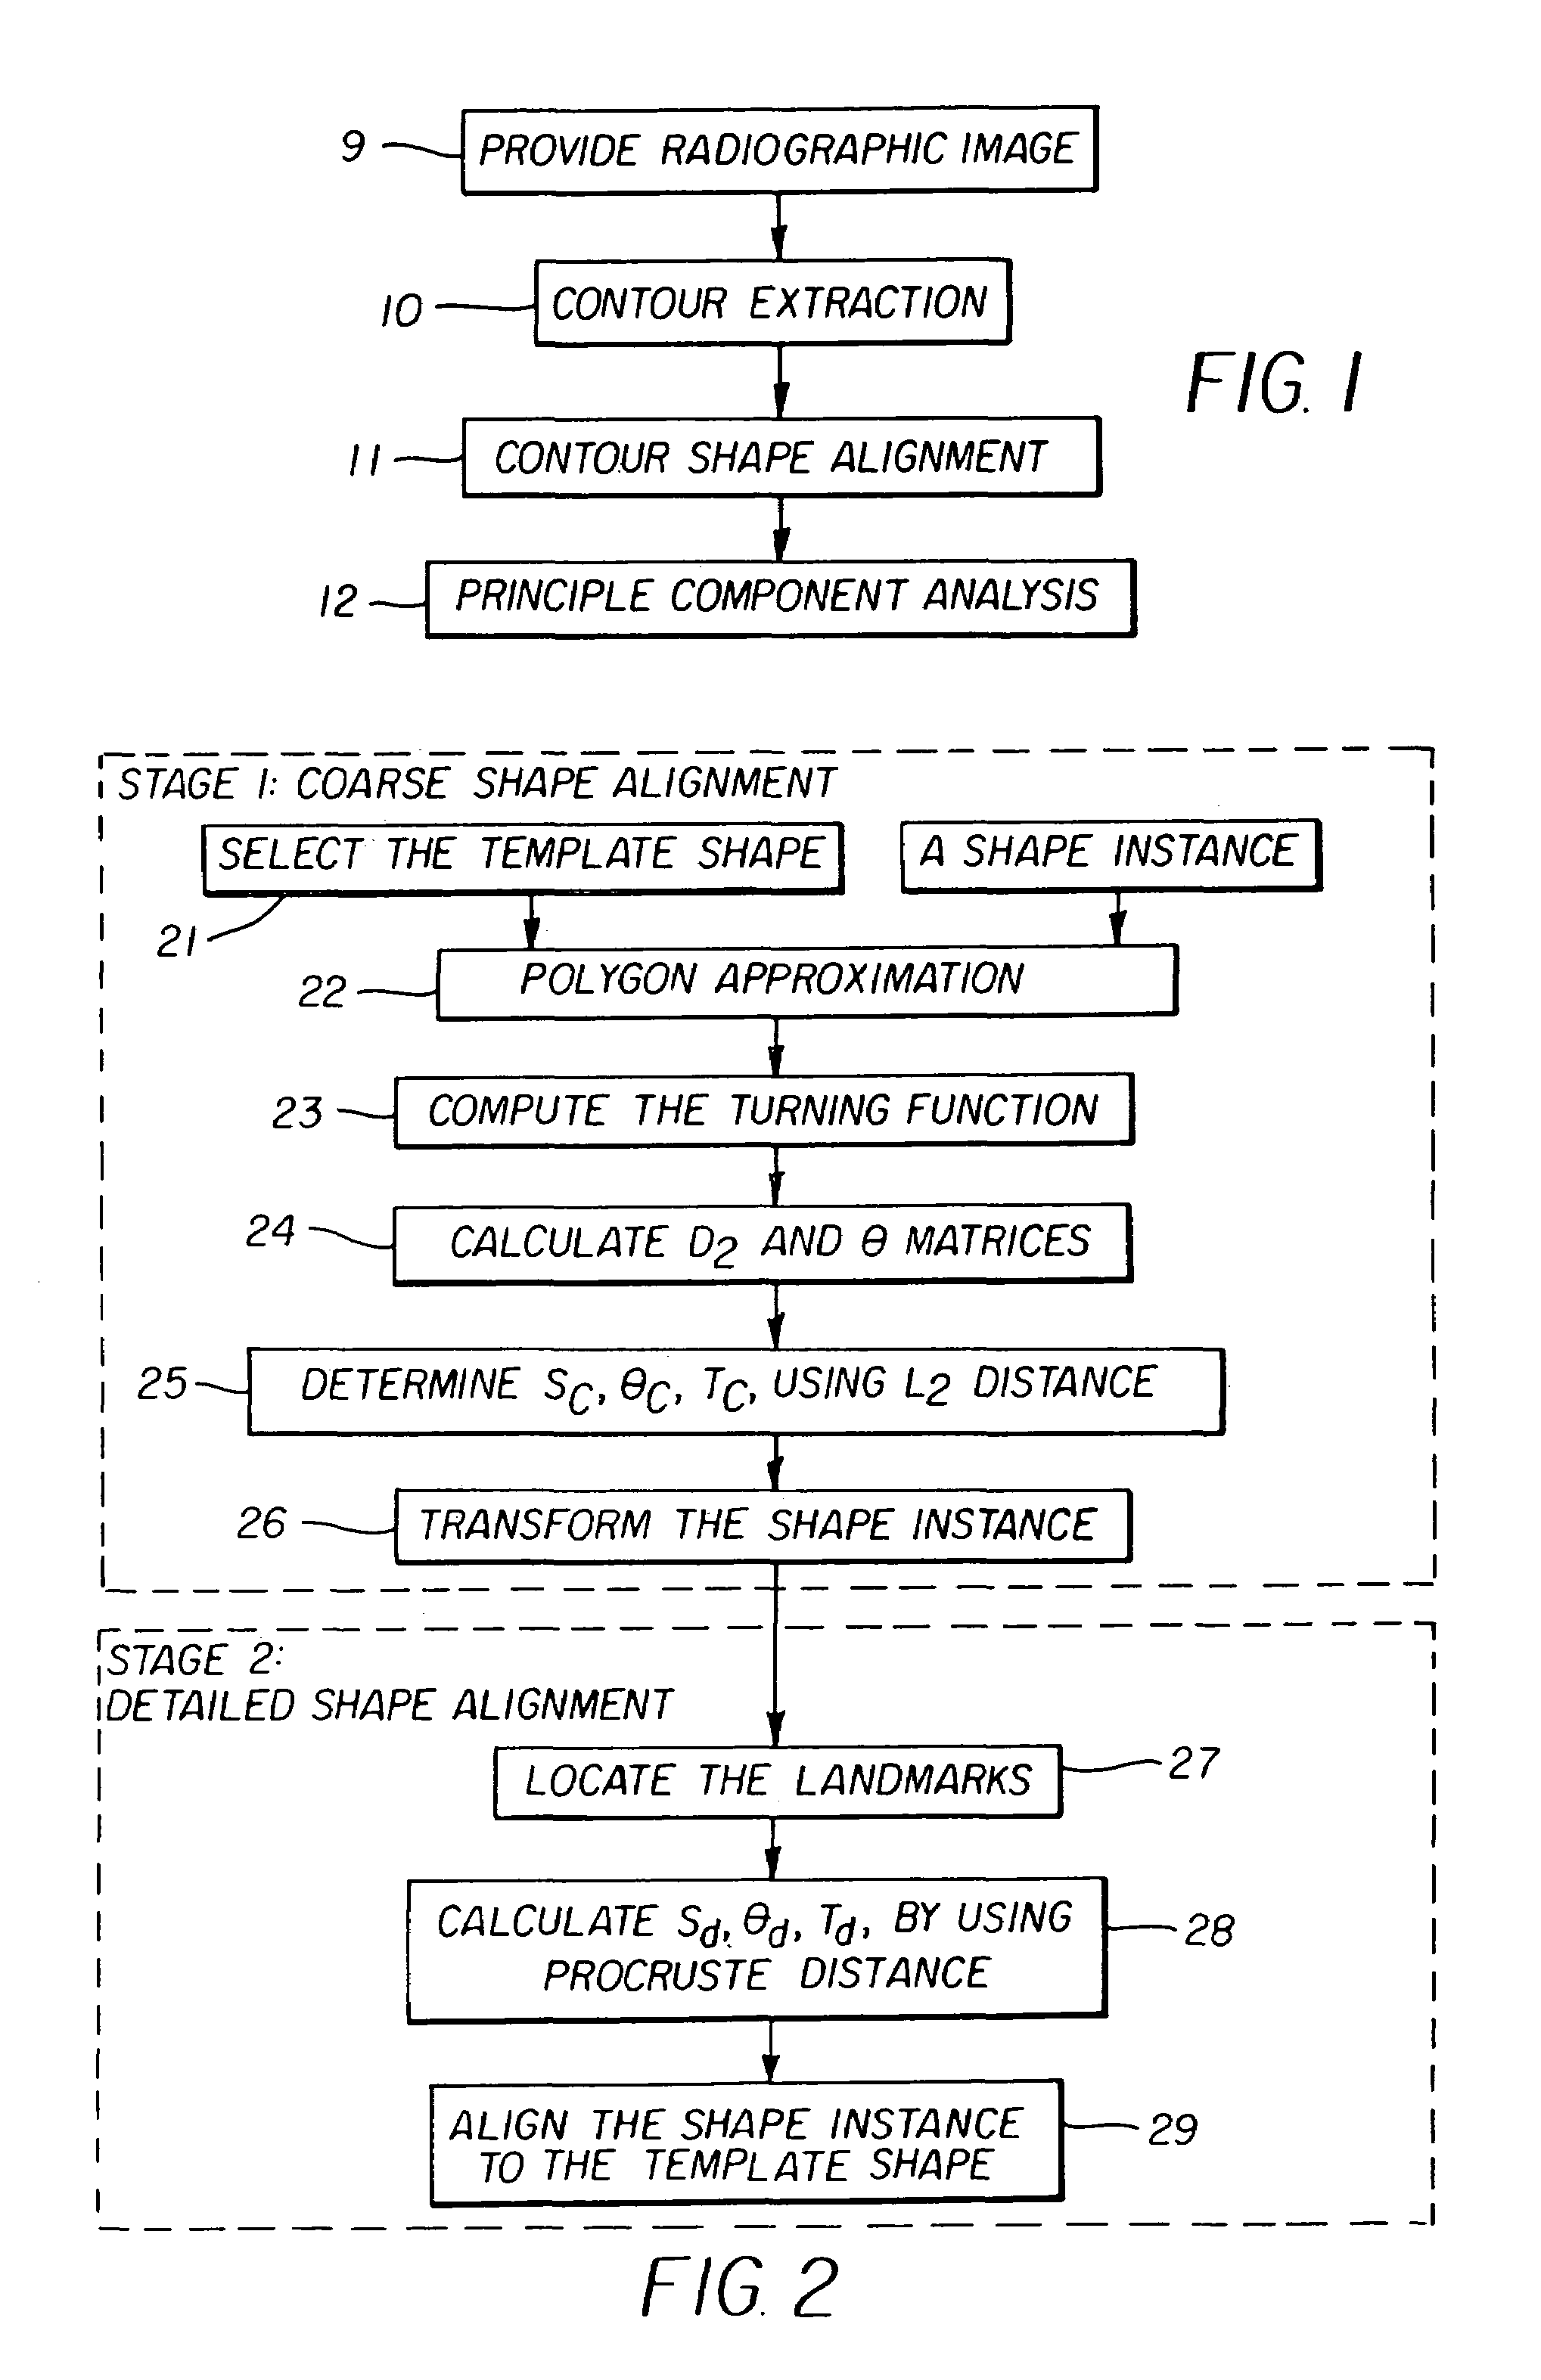 Method for automatic construction of 2D statistical shape model for the lung regions